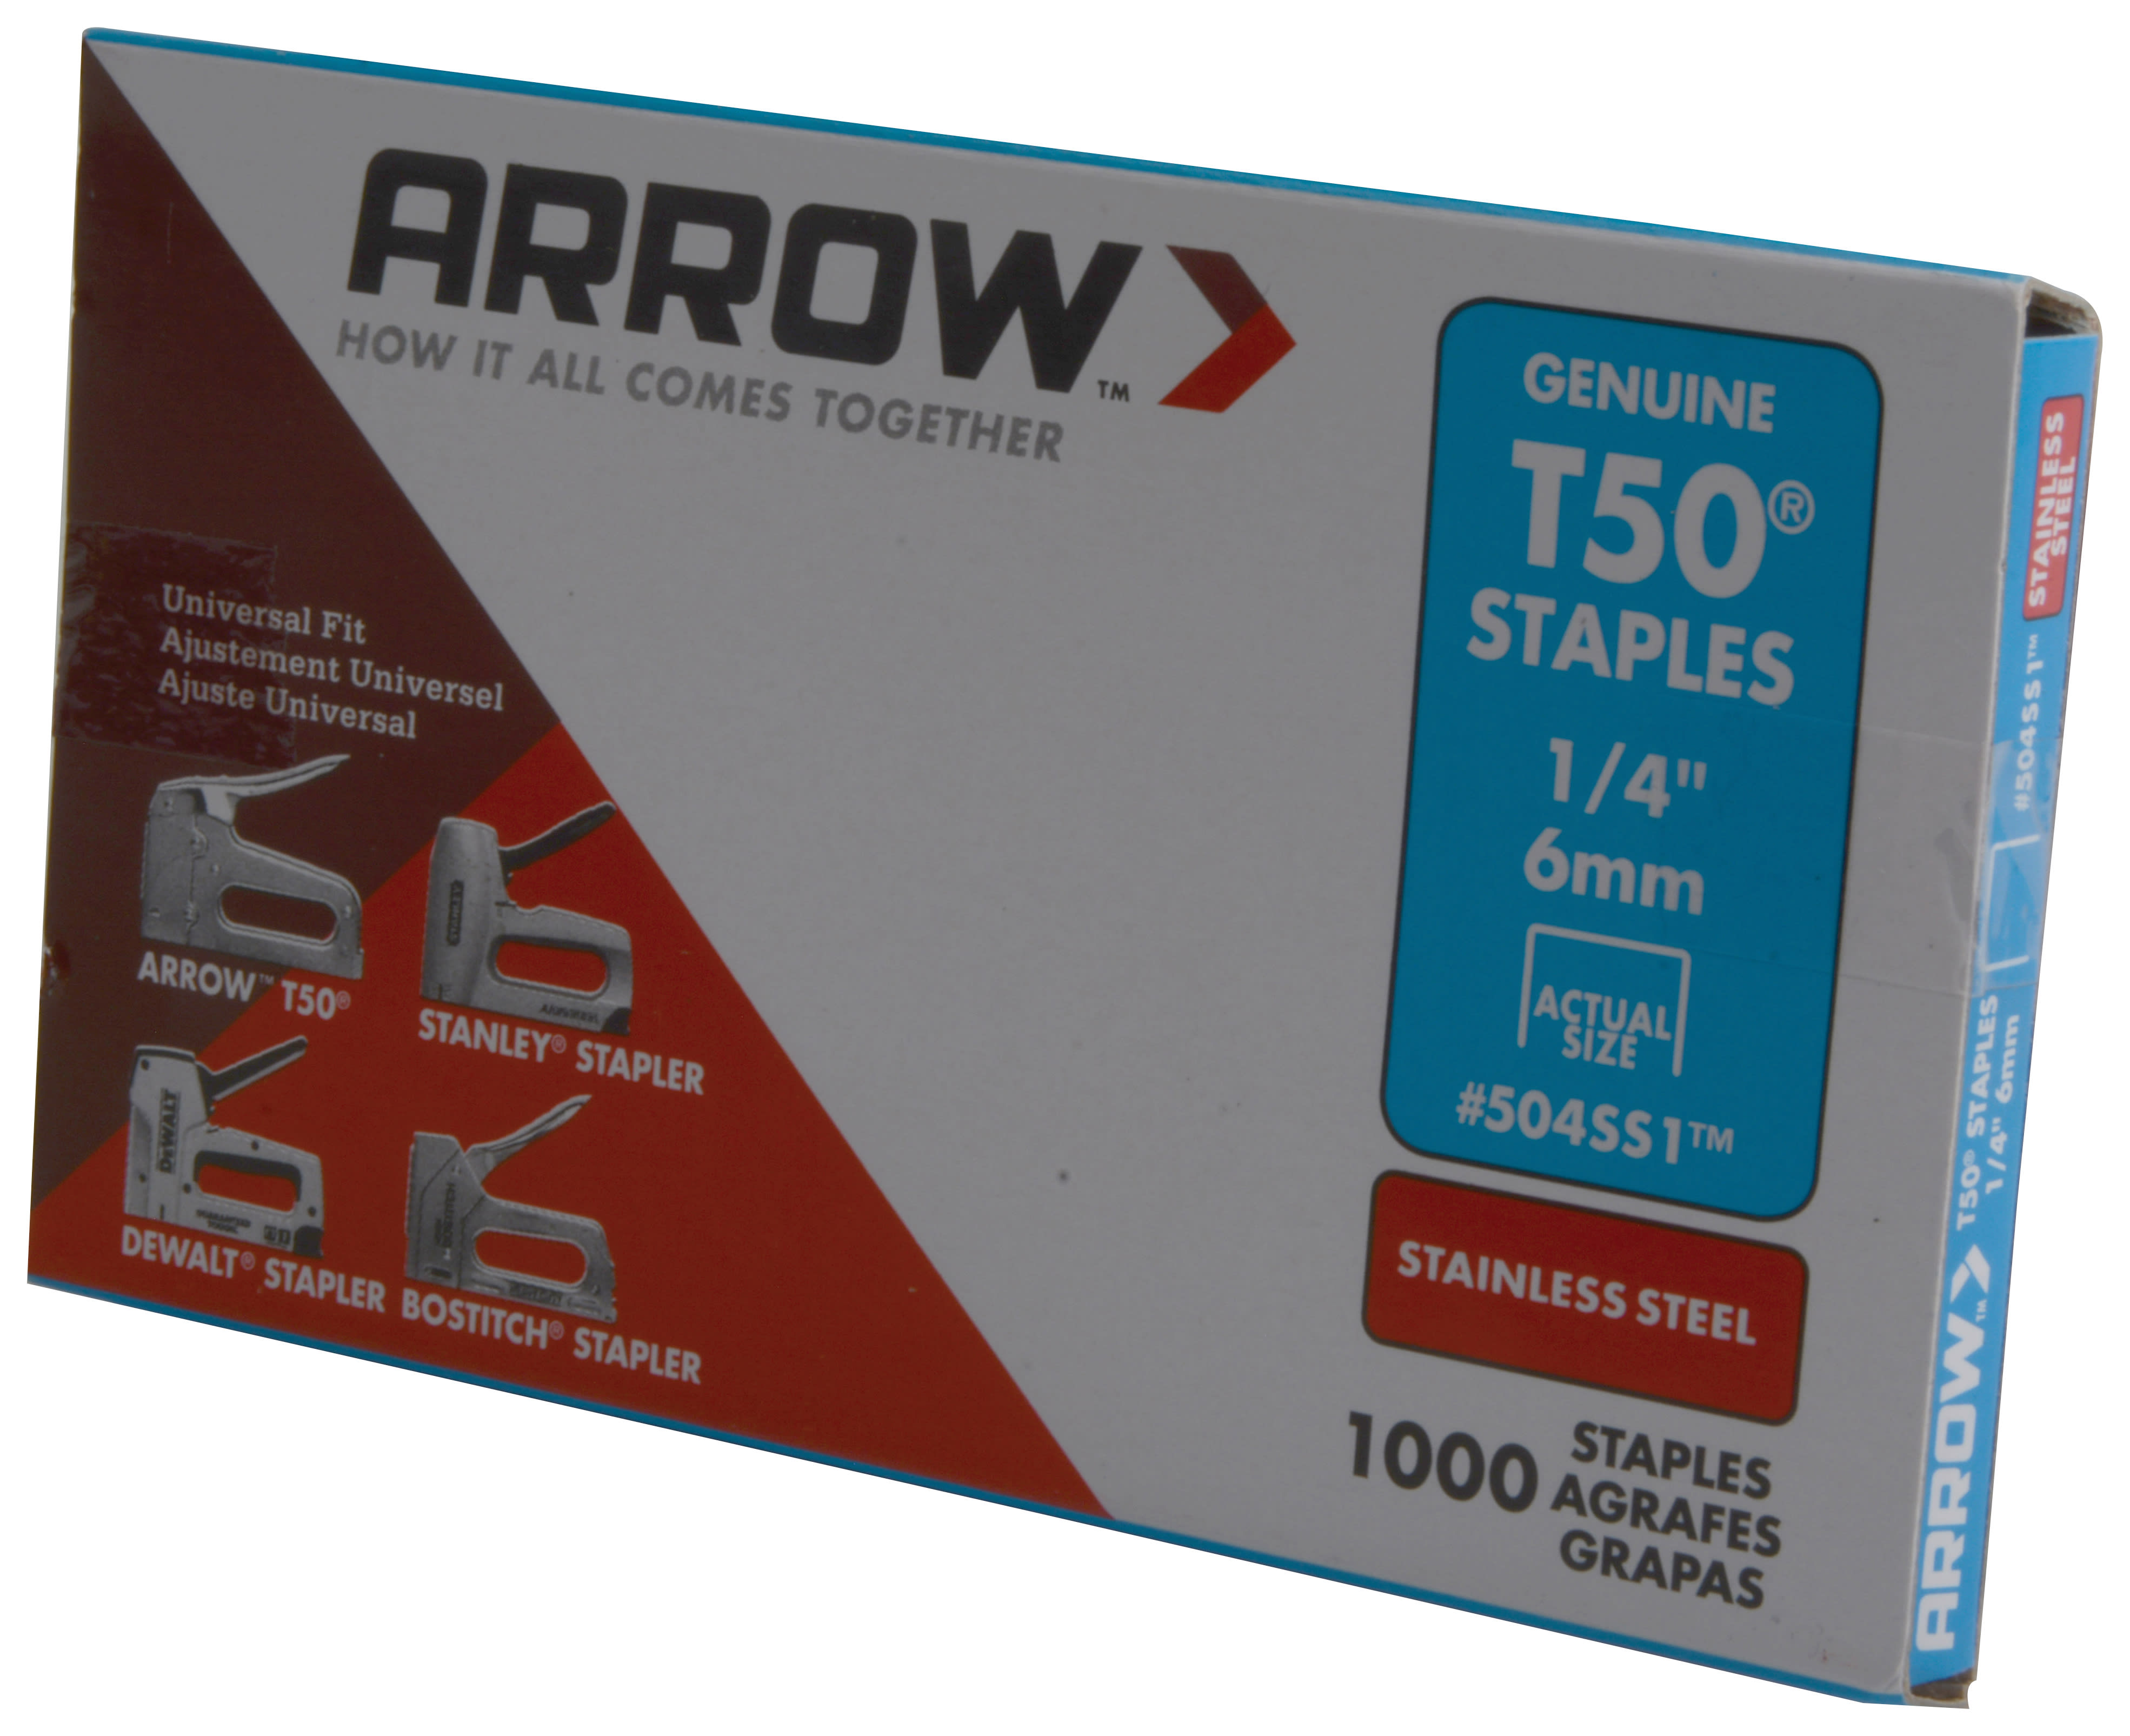 Arrow T50 Staples 6mm (1/4in) - Pack of